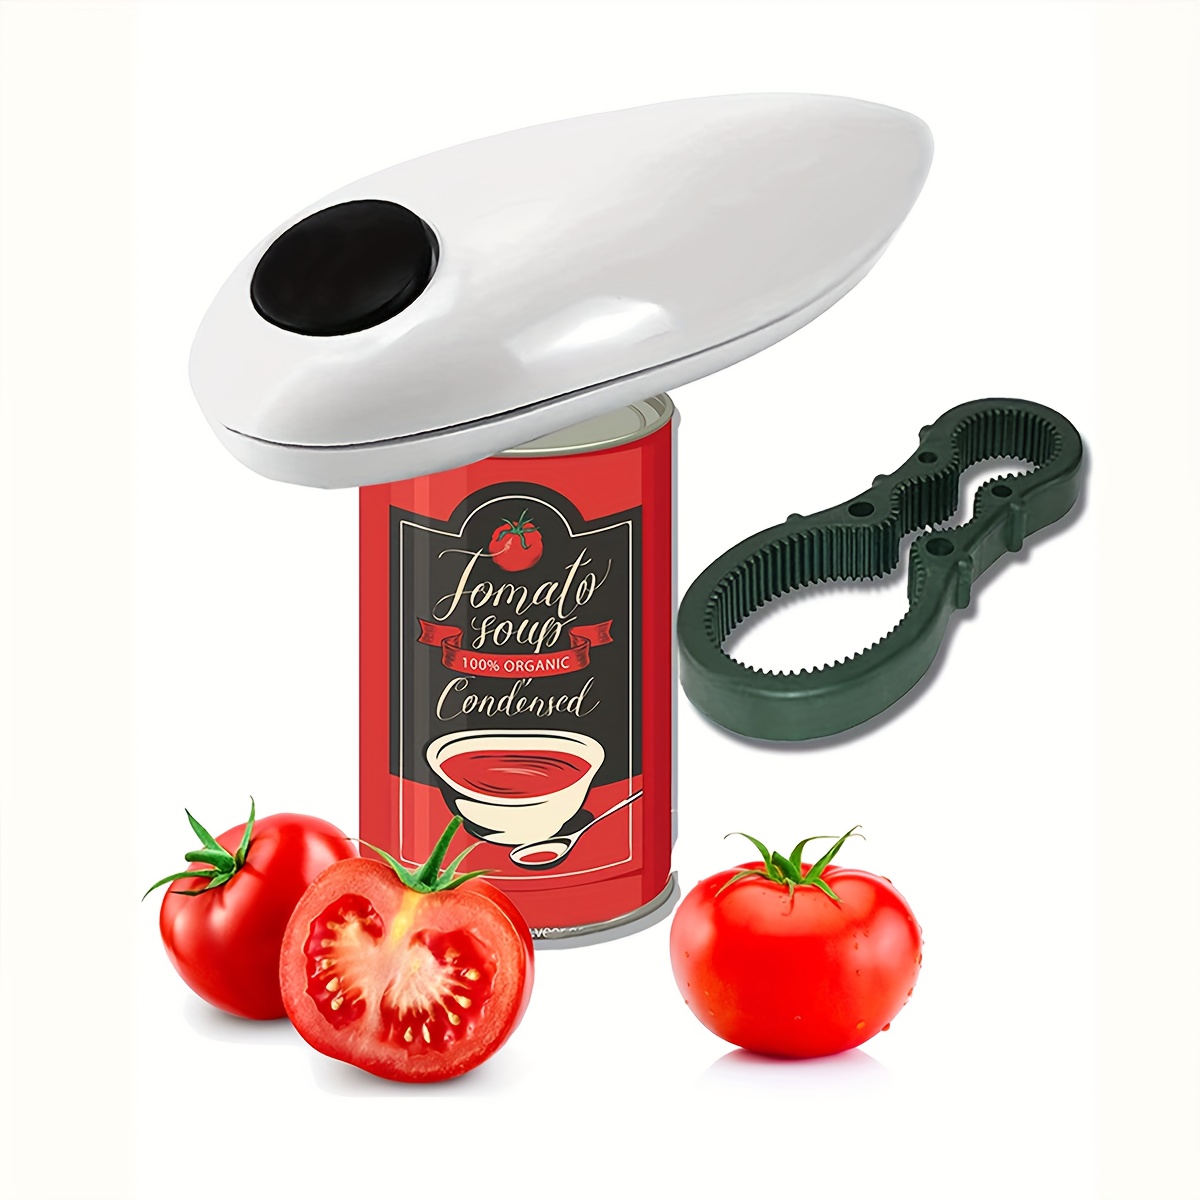 Electric Opener Mini One Touch Automatic